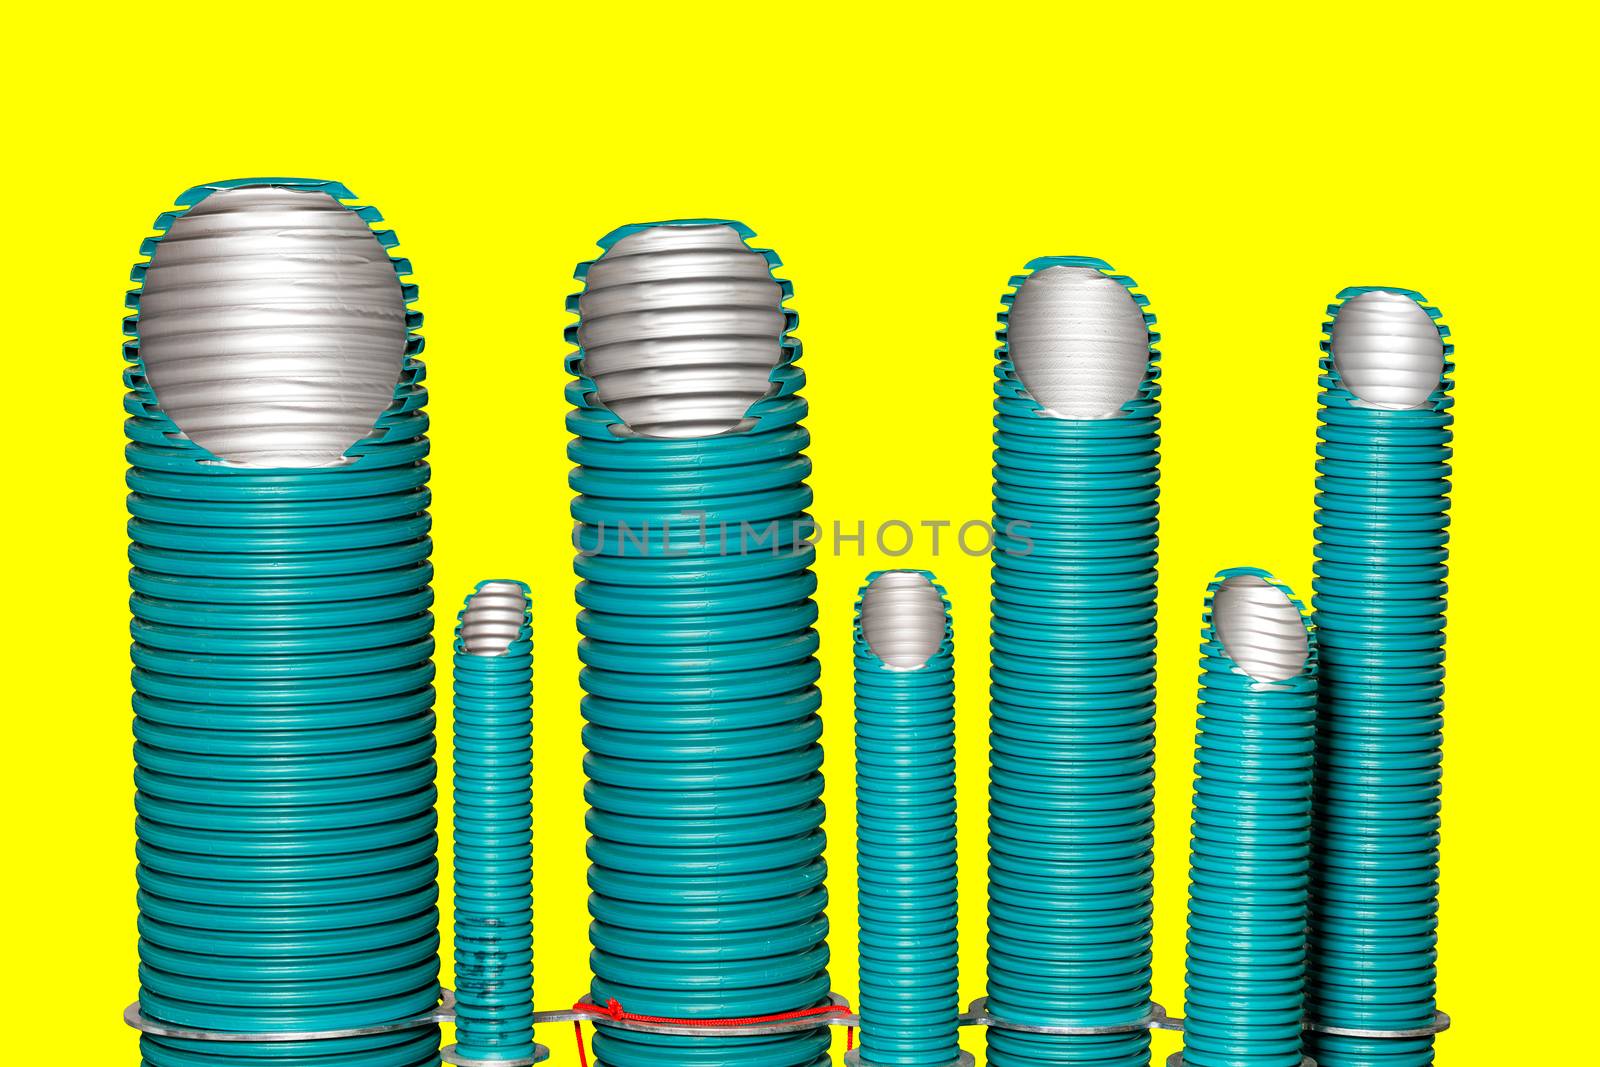 Polypropylene pipes of different diameters for use in water supply and air conditioning enterprises. The image is isolated on a yellow background.